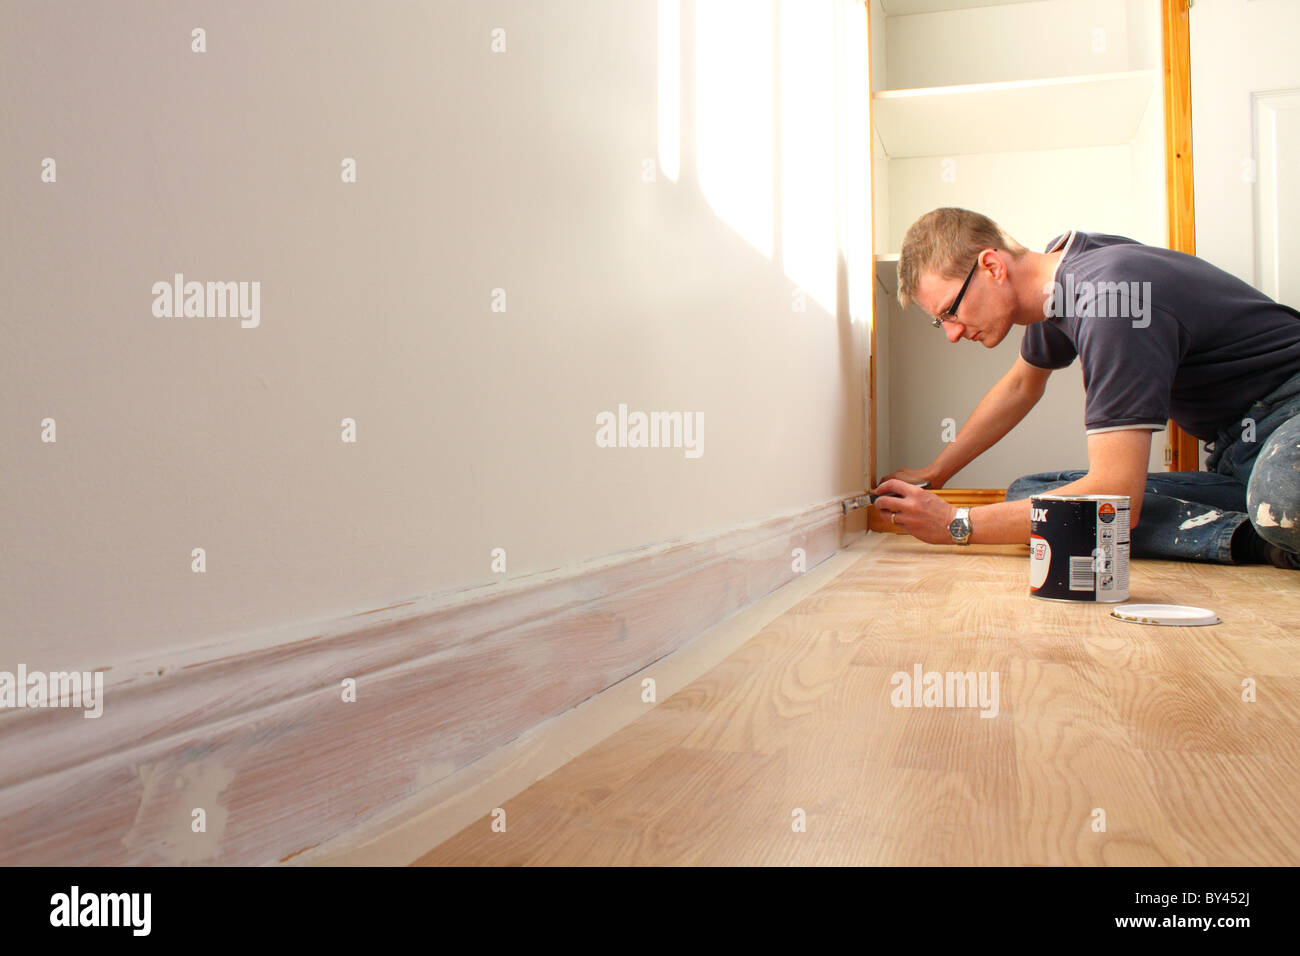 Man painting skirting board in a UK home Stock Photo